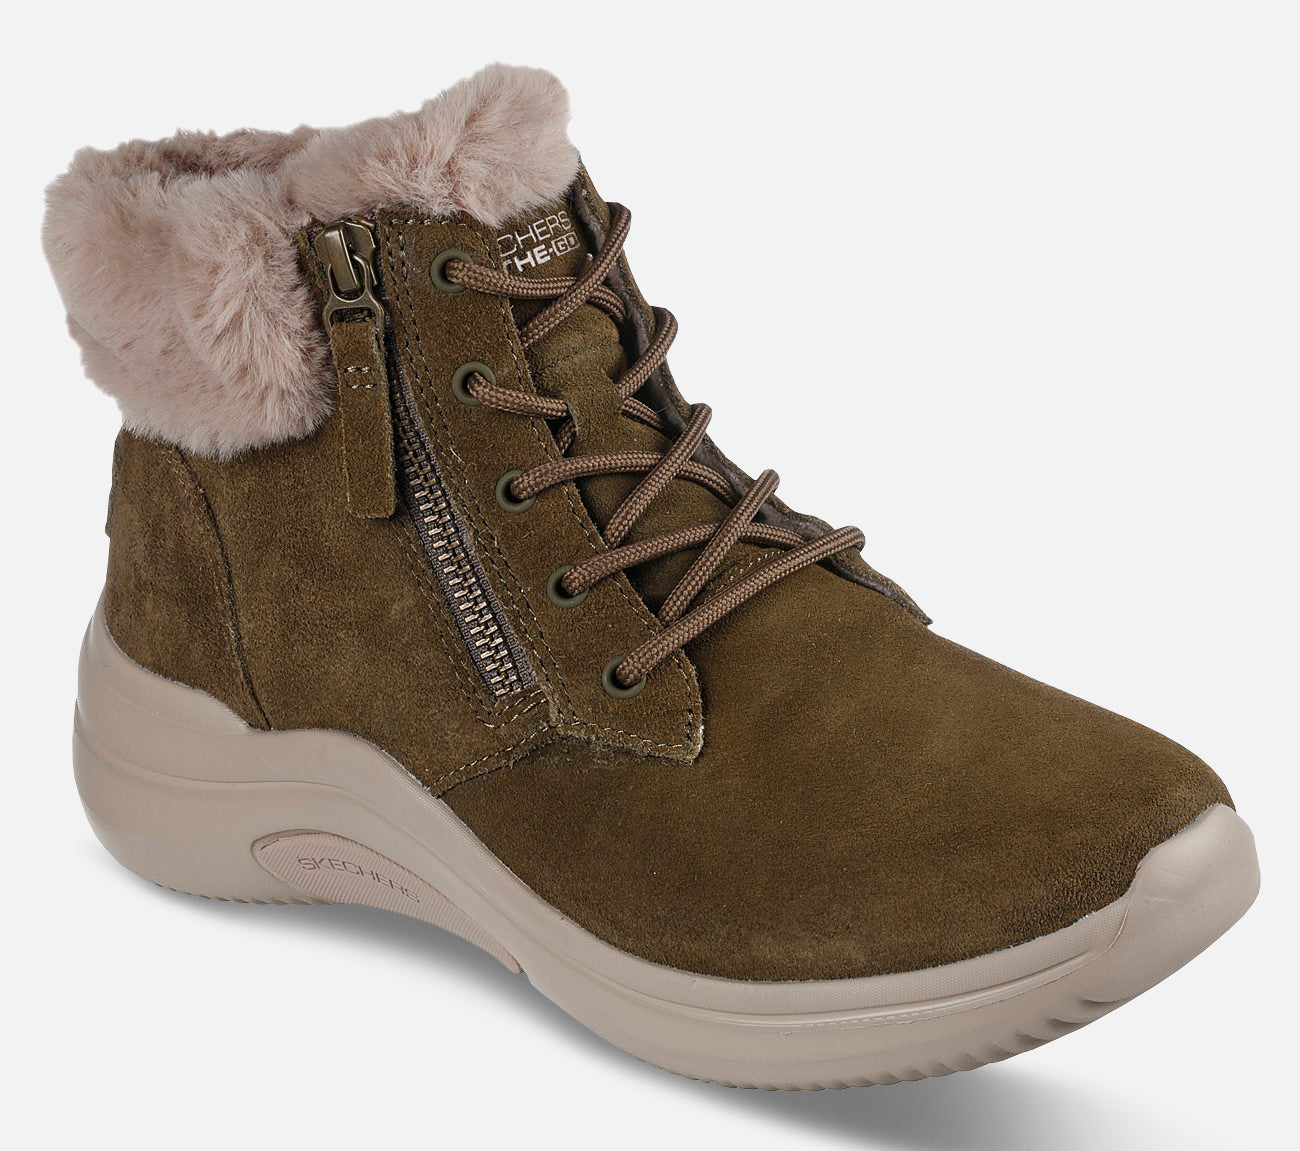 On-The-Go Midtown - Goodnatured Boot Skechers